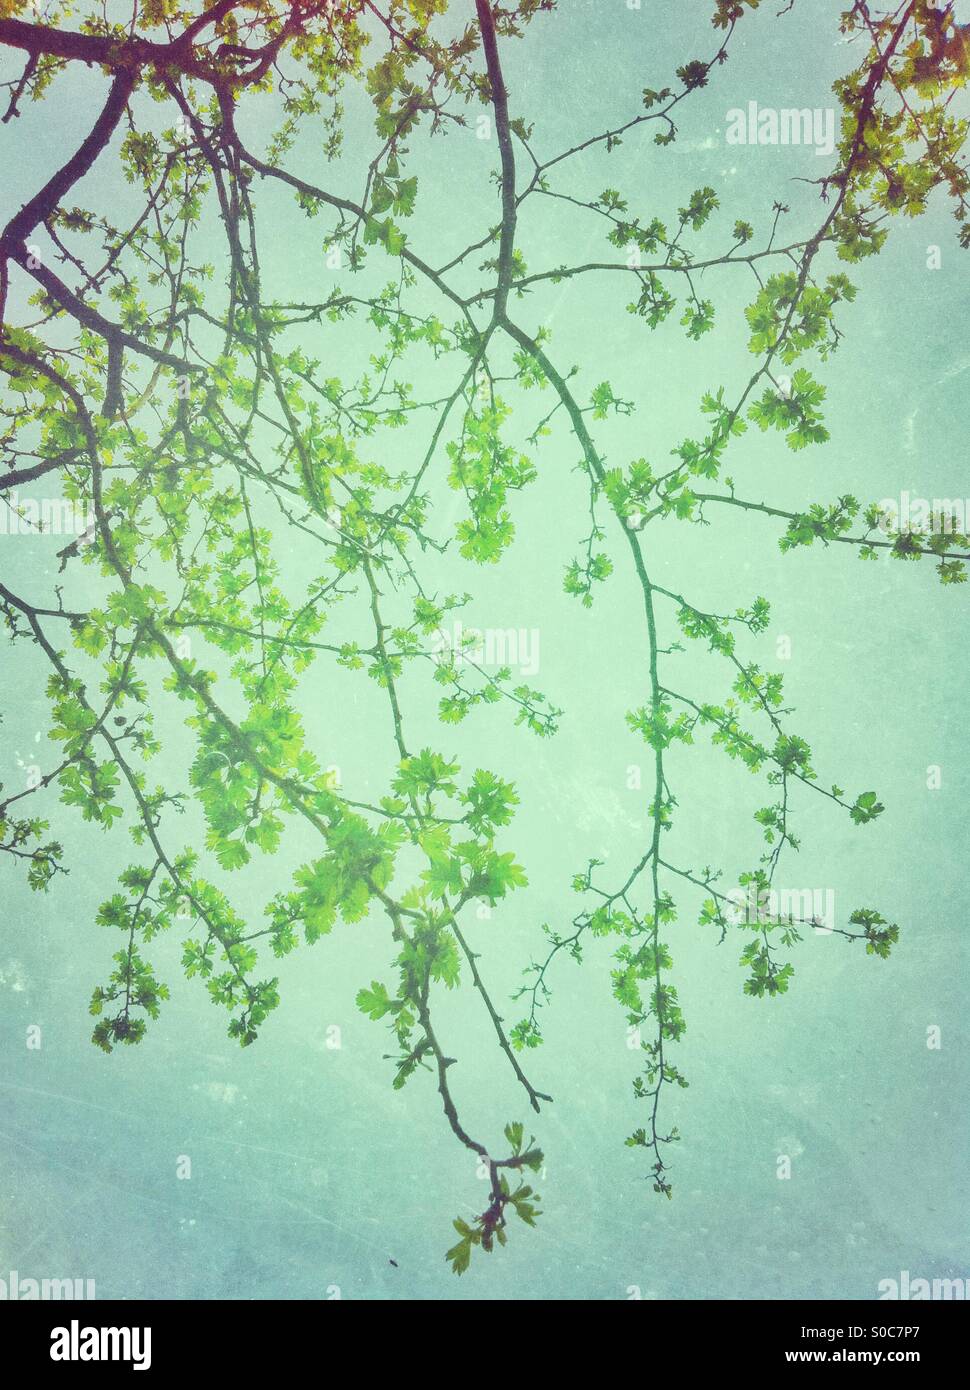 Fresh green spring leaves on branches Stock Photo